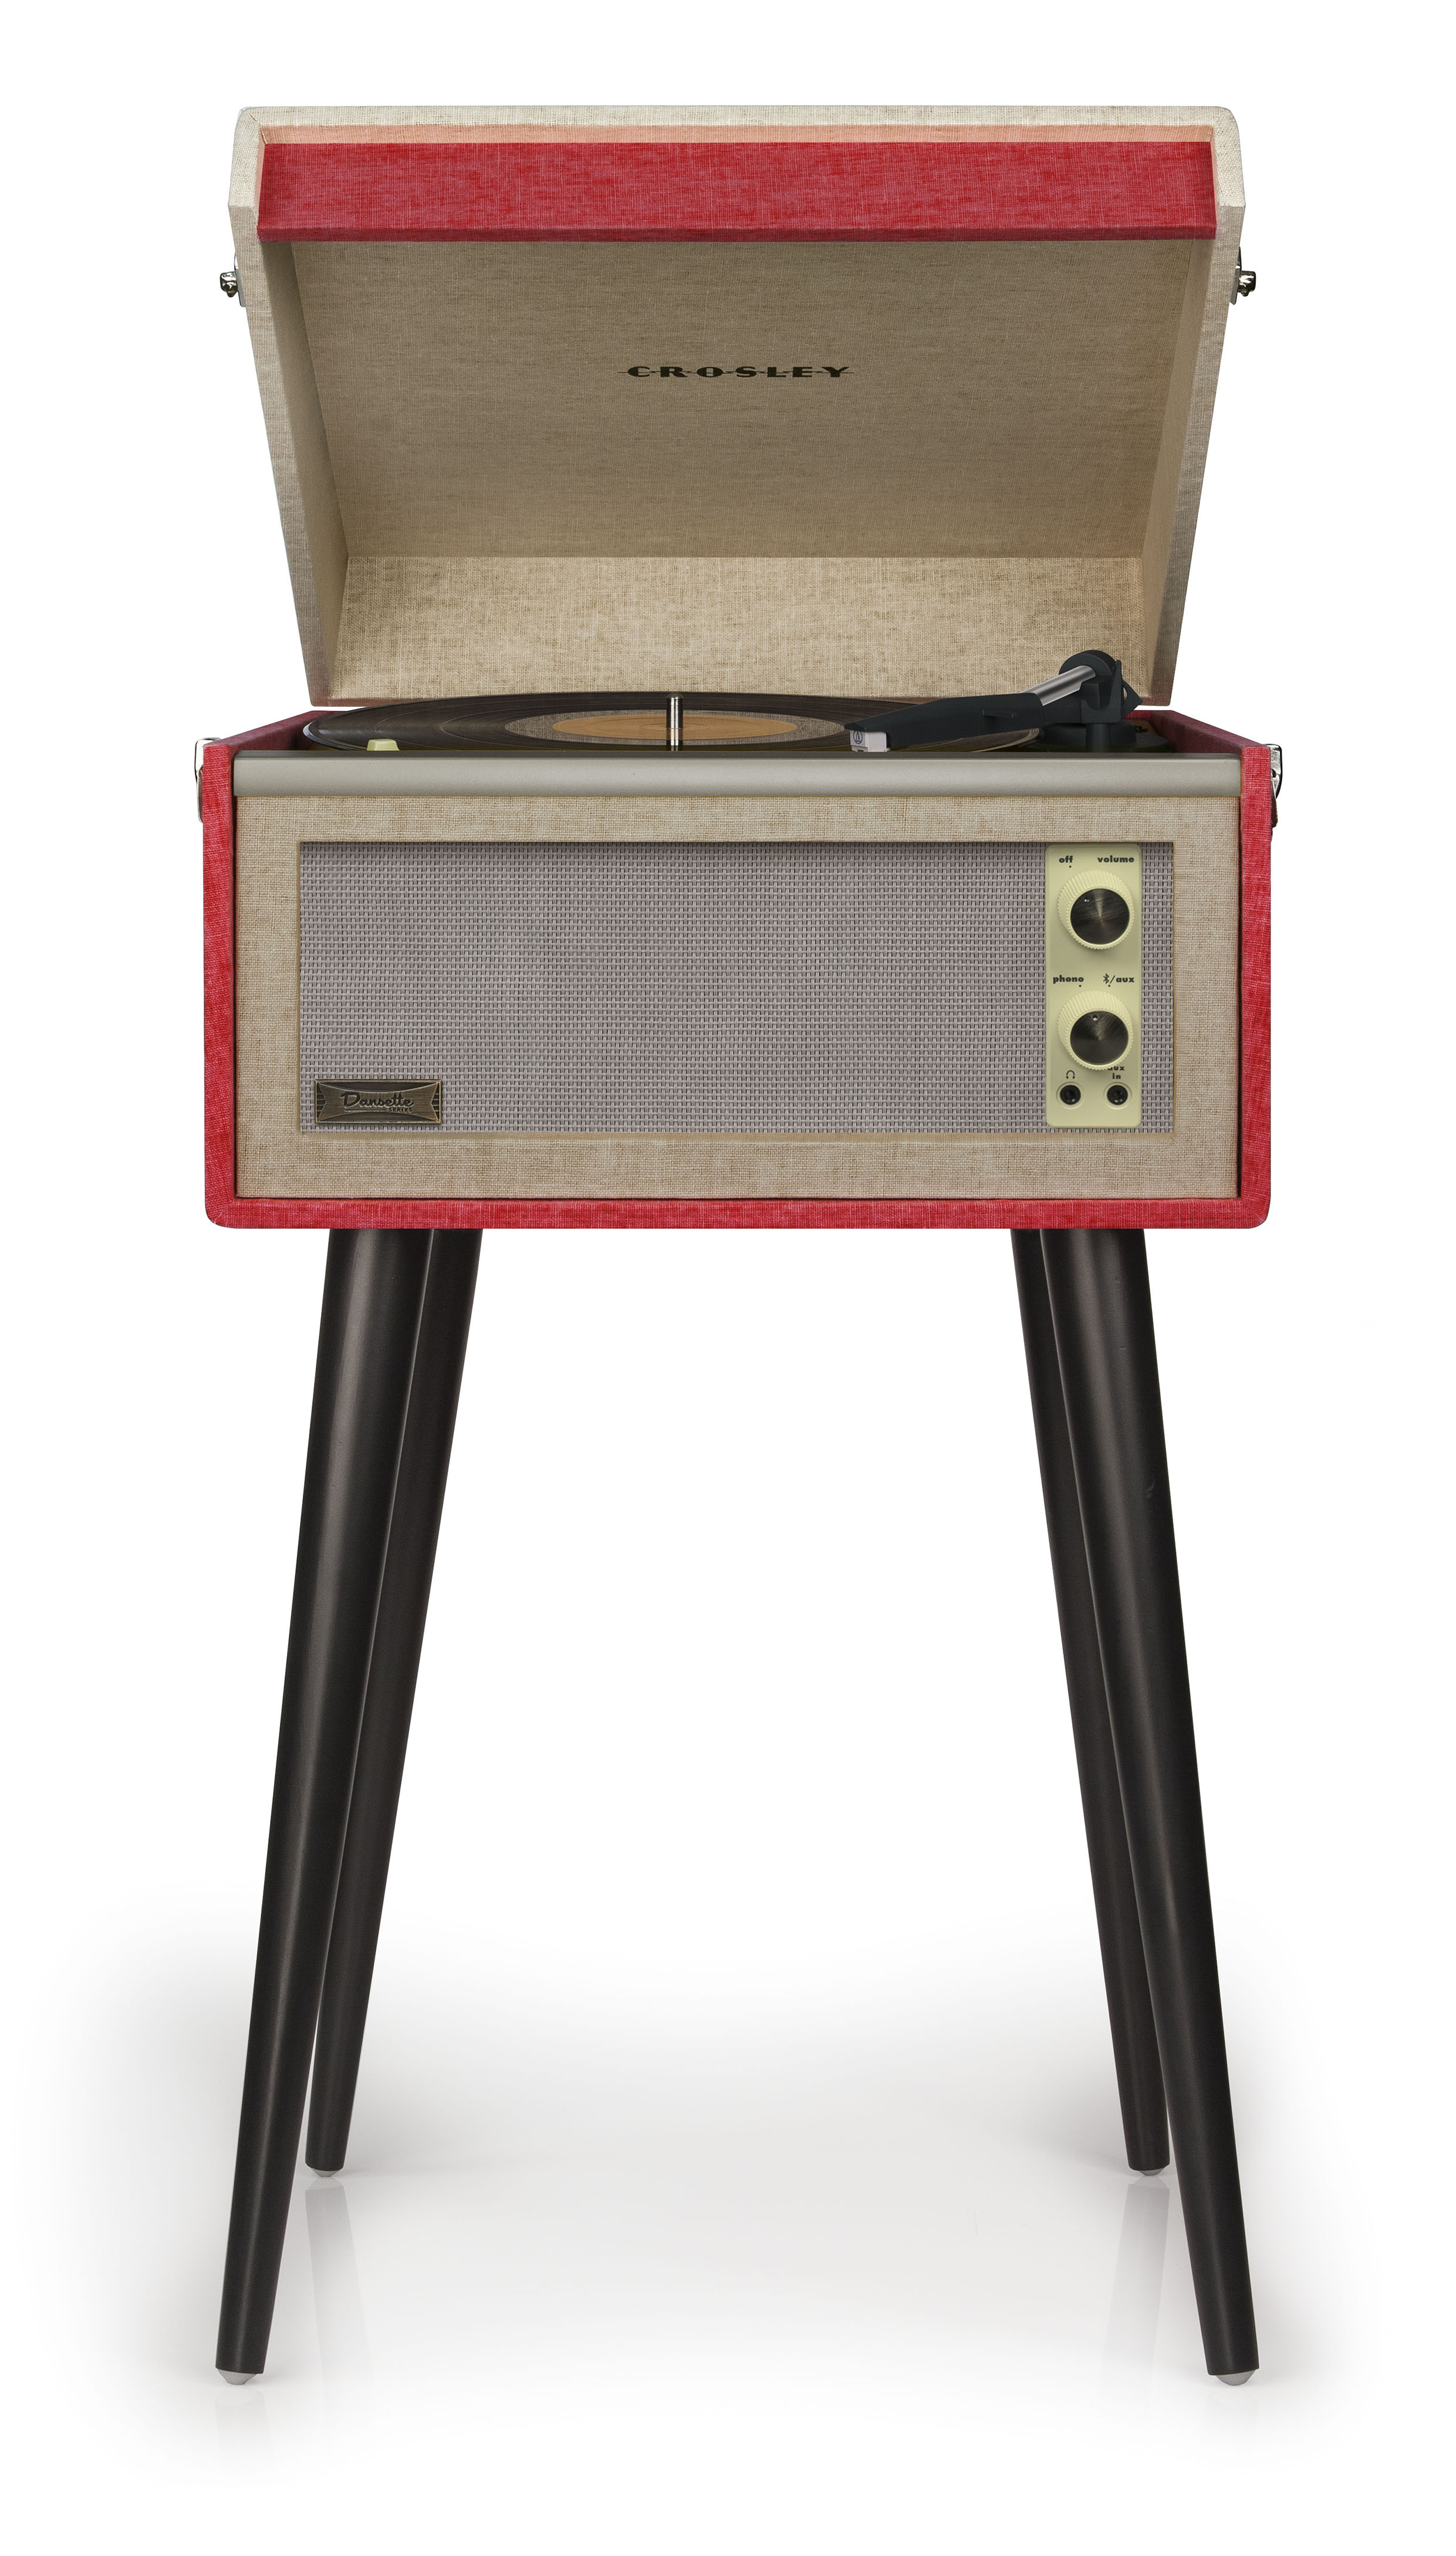 Crosley Dansette Bermuda Bluetooth Portable Suitcase Record Player with 2-speed Turntable - Red - CR6233D-RE - image 1 of 7